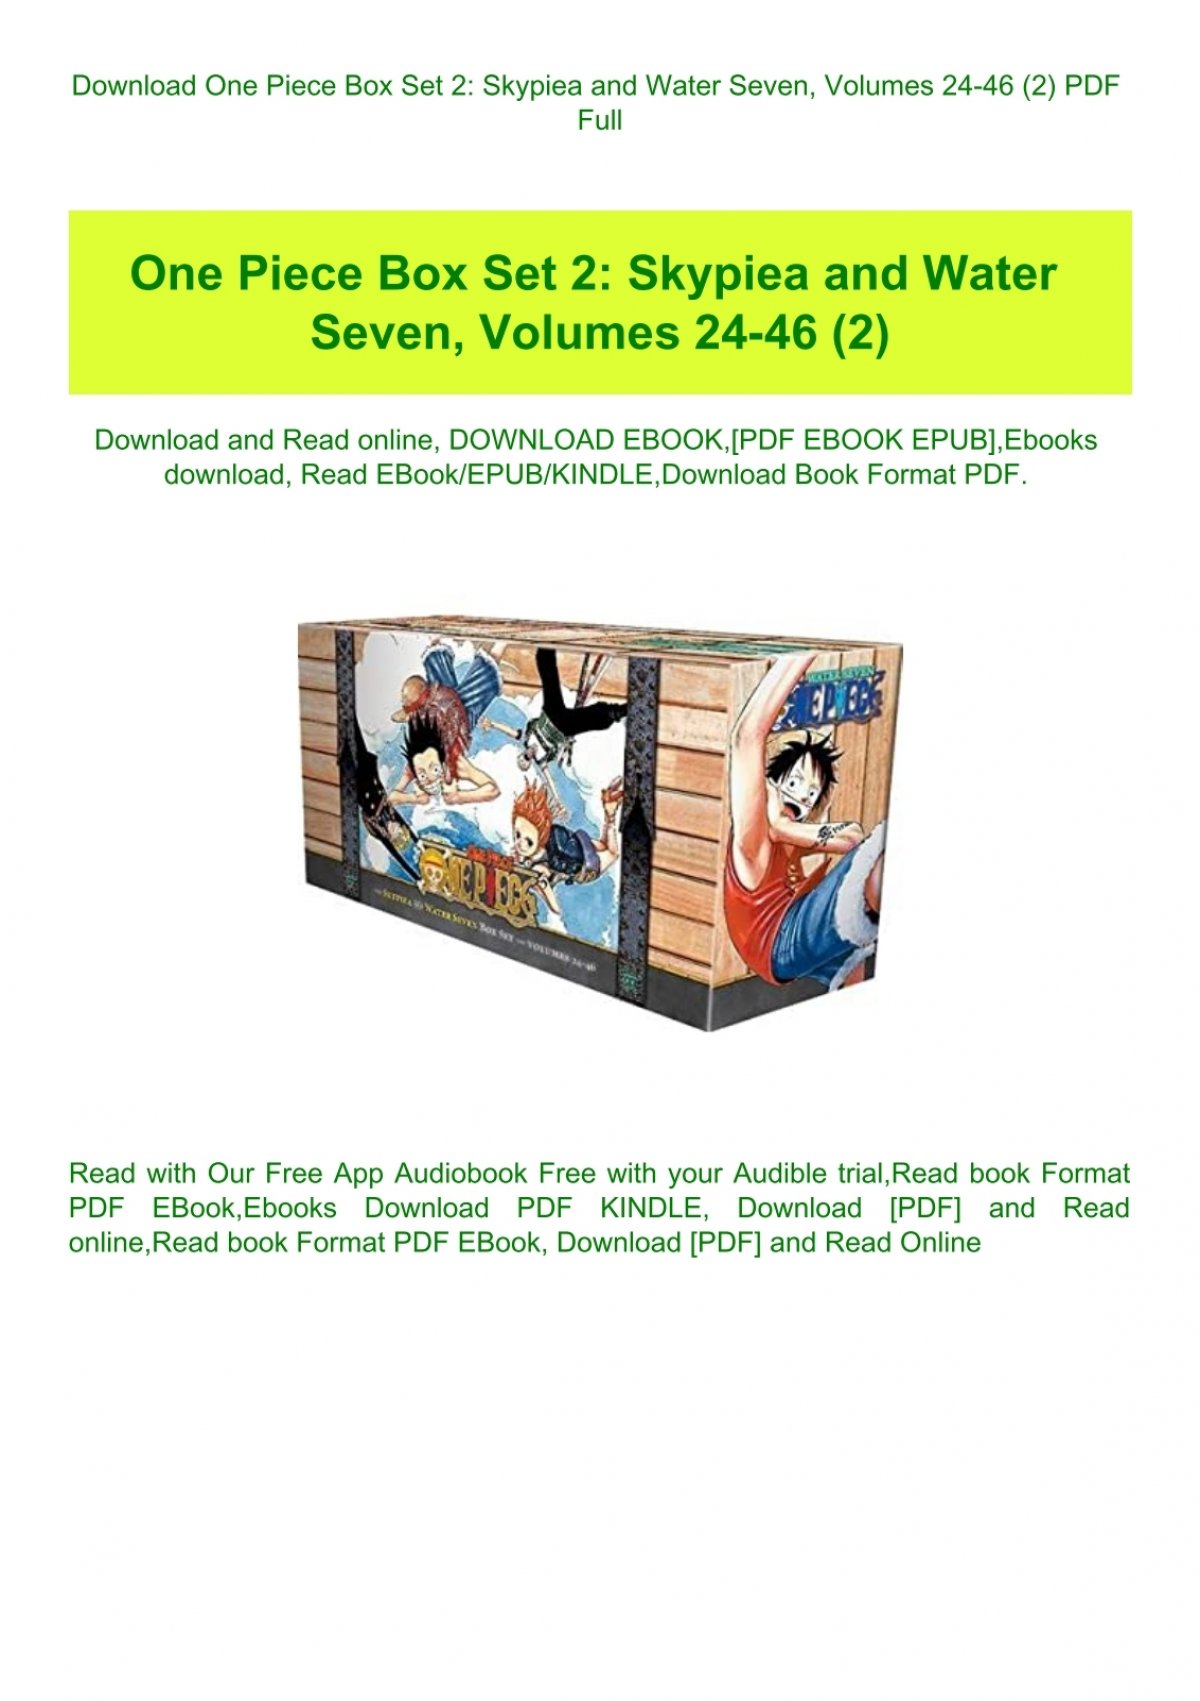 Download One Piece Box Set 2 Skypiea And Water Seven Volumes 24 46 2 Pdf Full